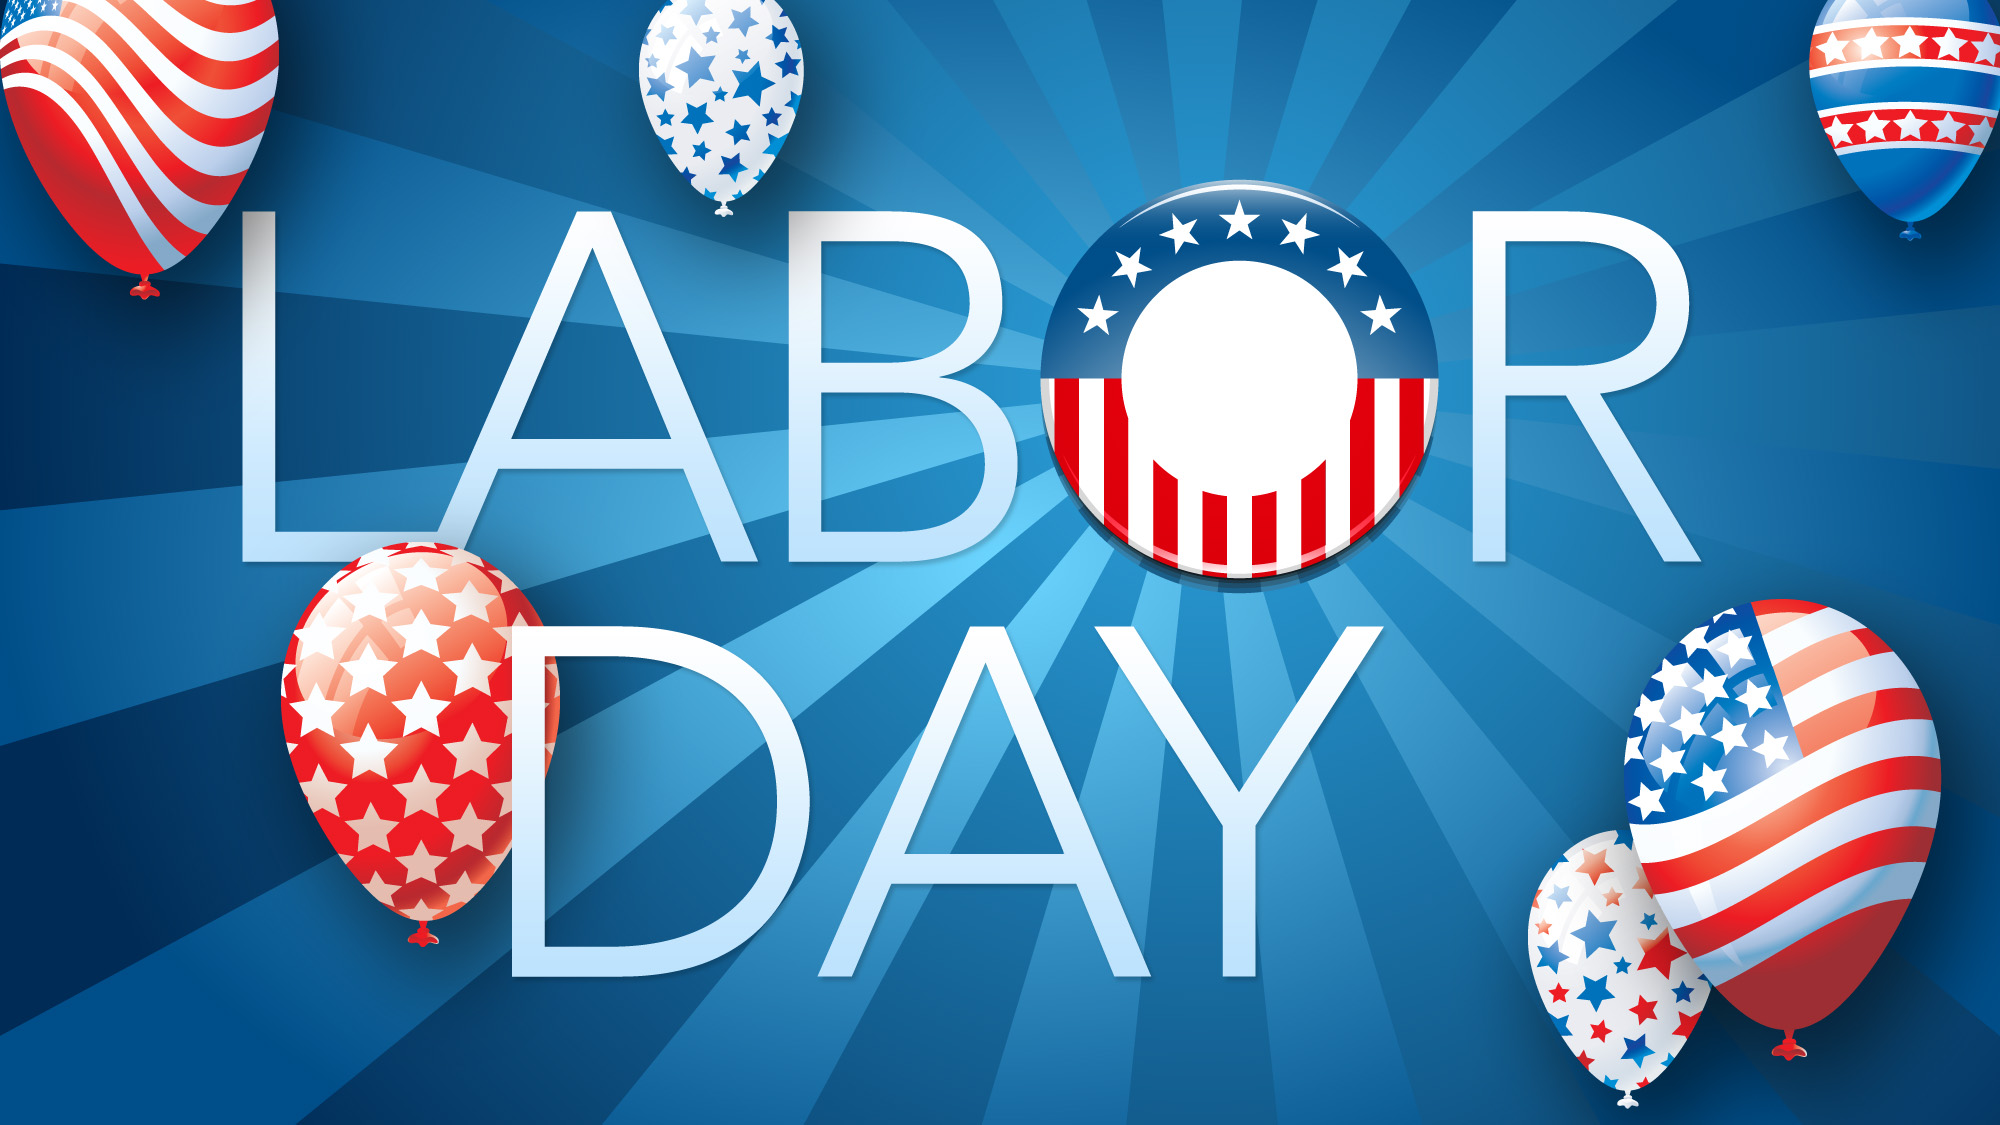 Labor Day Quotes Image Sayings Sms Greetings